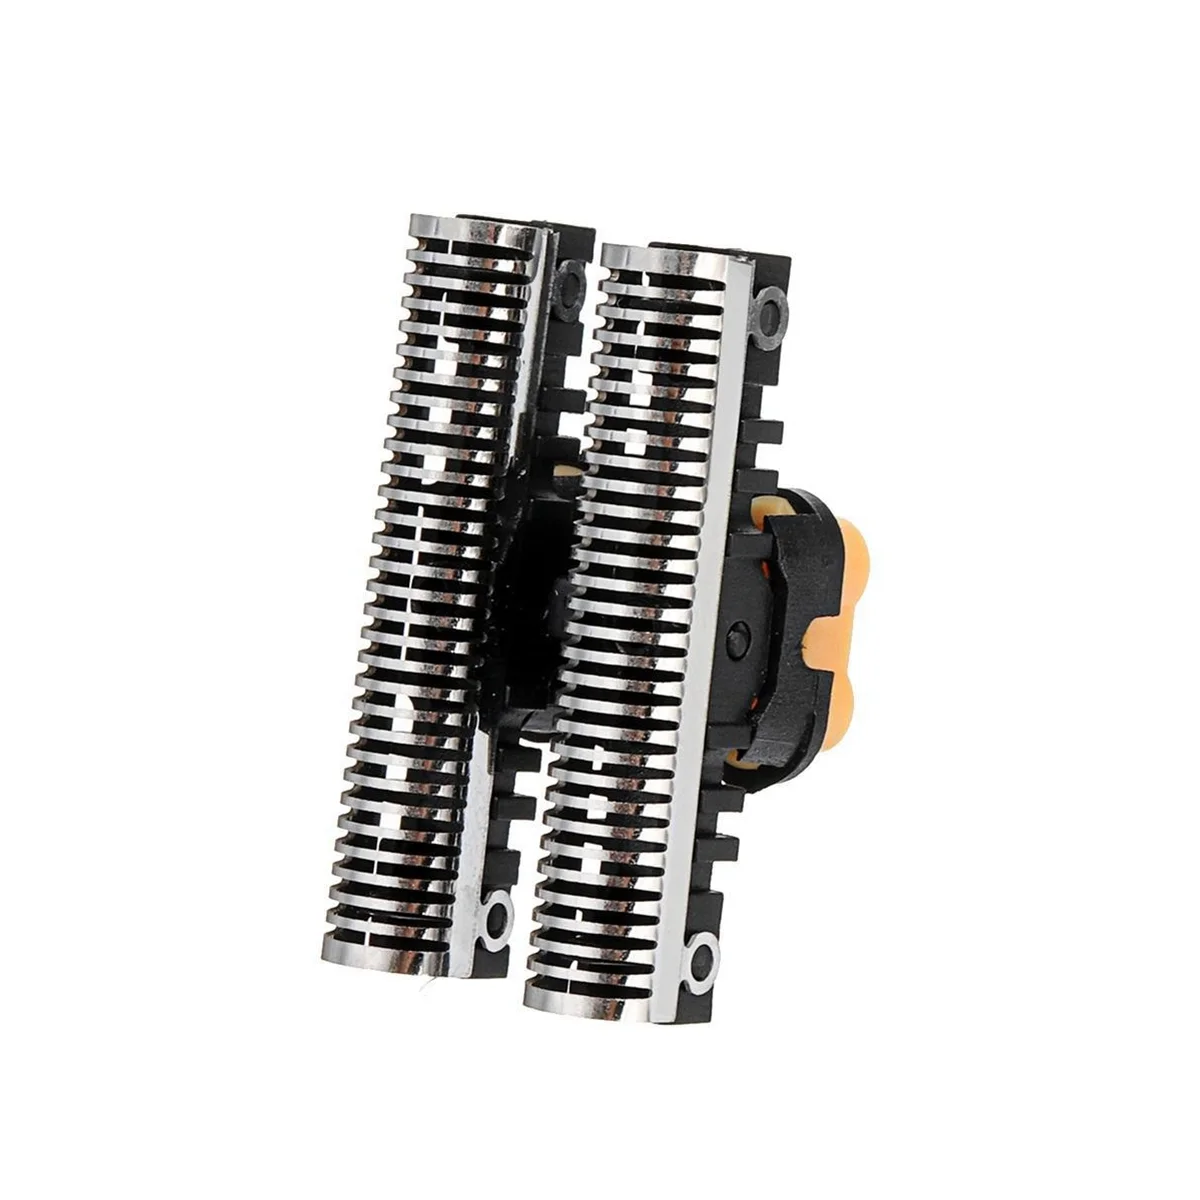  30B,310,330,340 Shaver Head Cassette Replacement for Braun Old  model: 7630,7640,7650,7664,7680,7690,7763,7765,7783,7785,7790,5746 : Beauty  & Personal Care